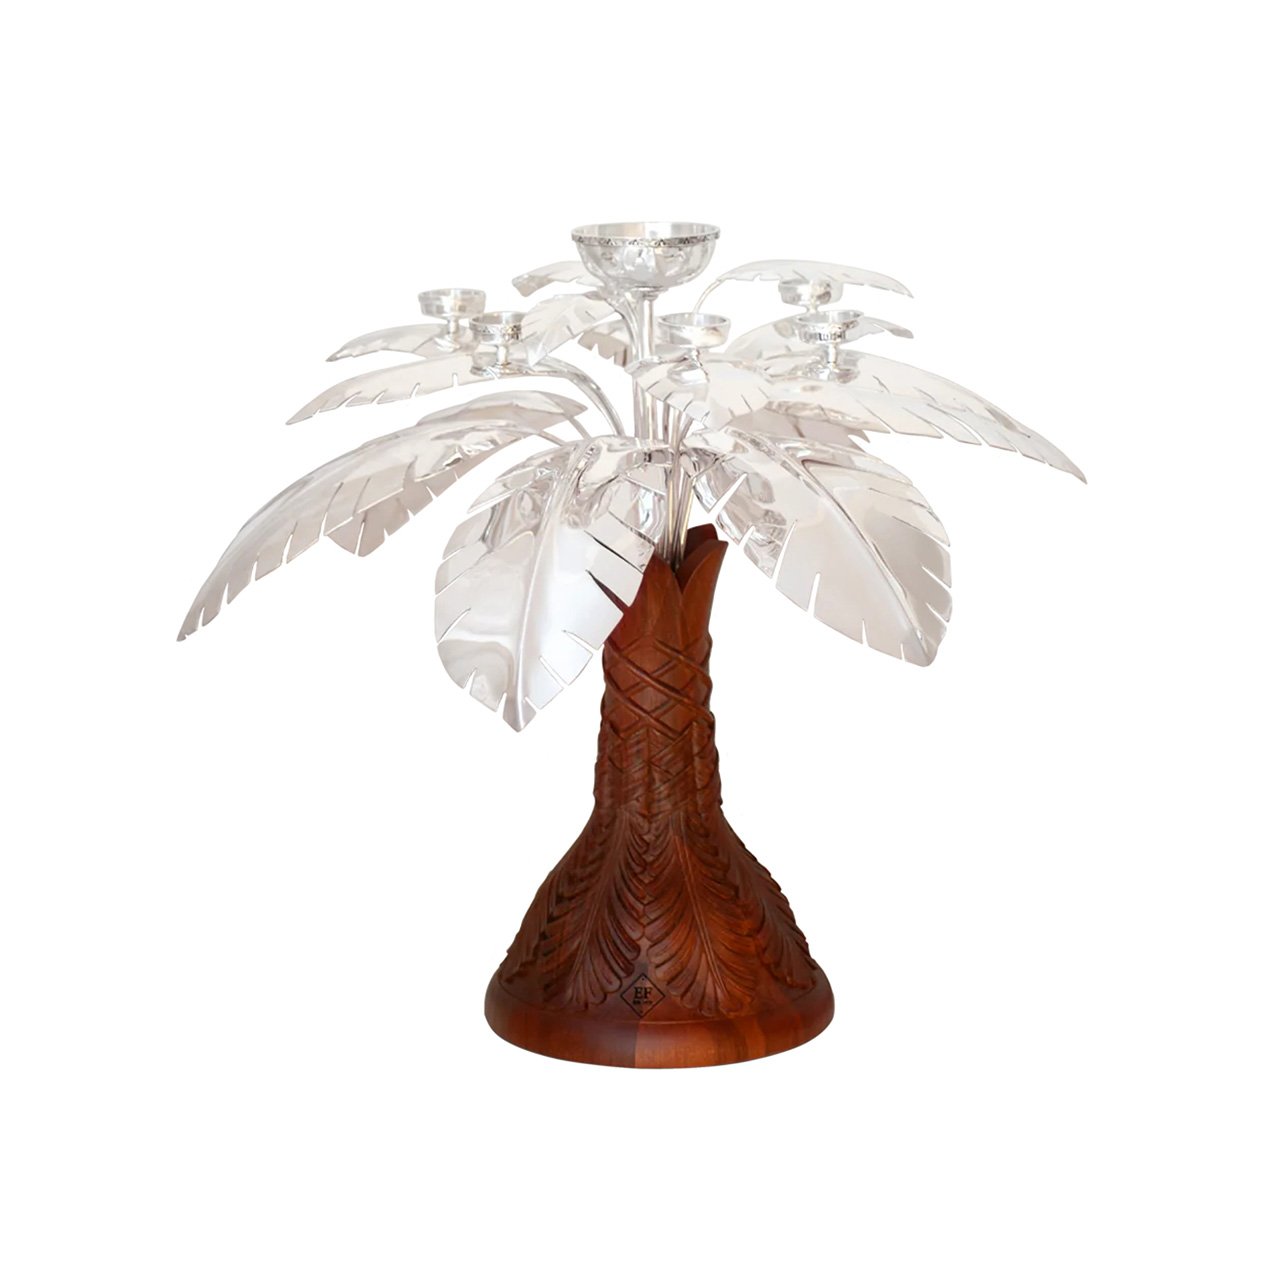 Haviland Romane Collection Palm Tree Candelabra with silver leaves and wood trunk base